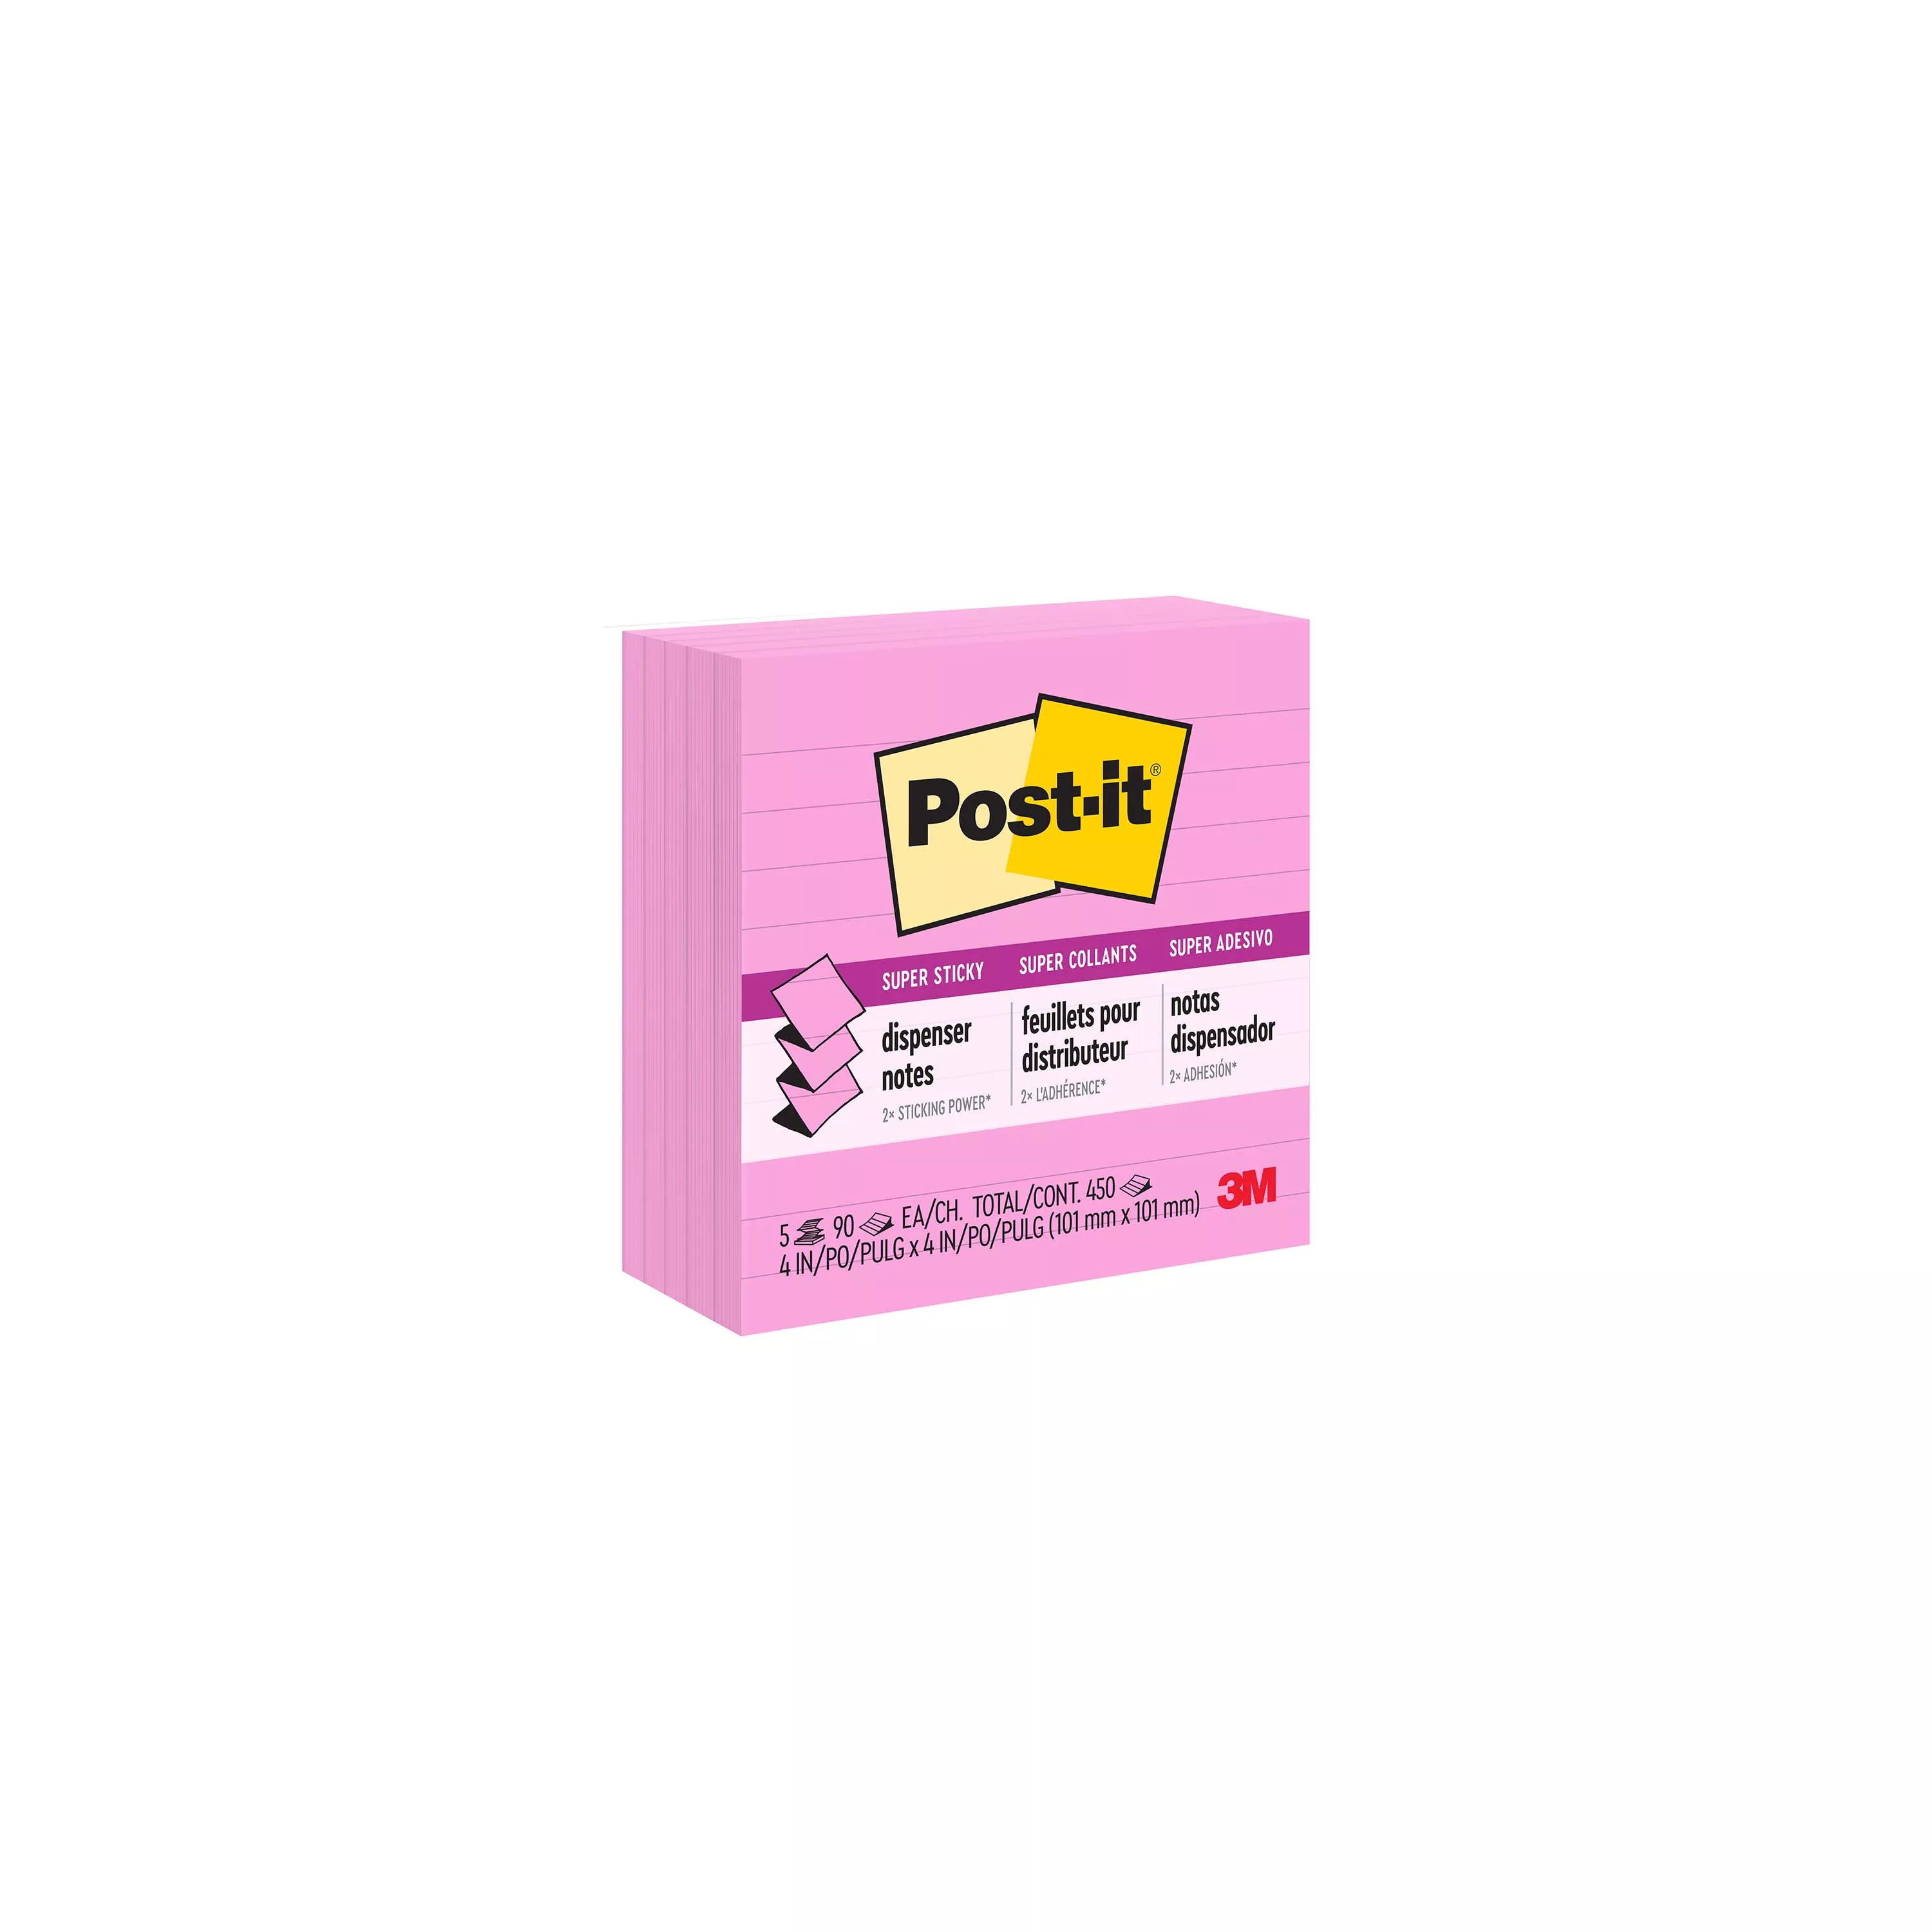 Post-it® Super Sticky Dispenser Pop-up Notes Notes R440-NPSS, 4 in x 4 in (101 mm x 101 mm)